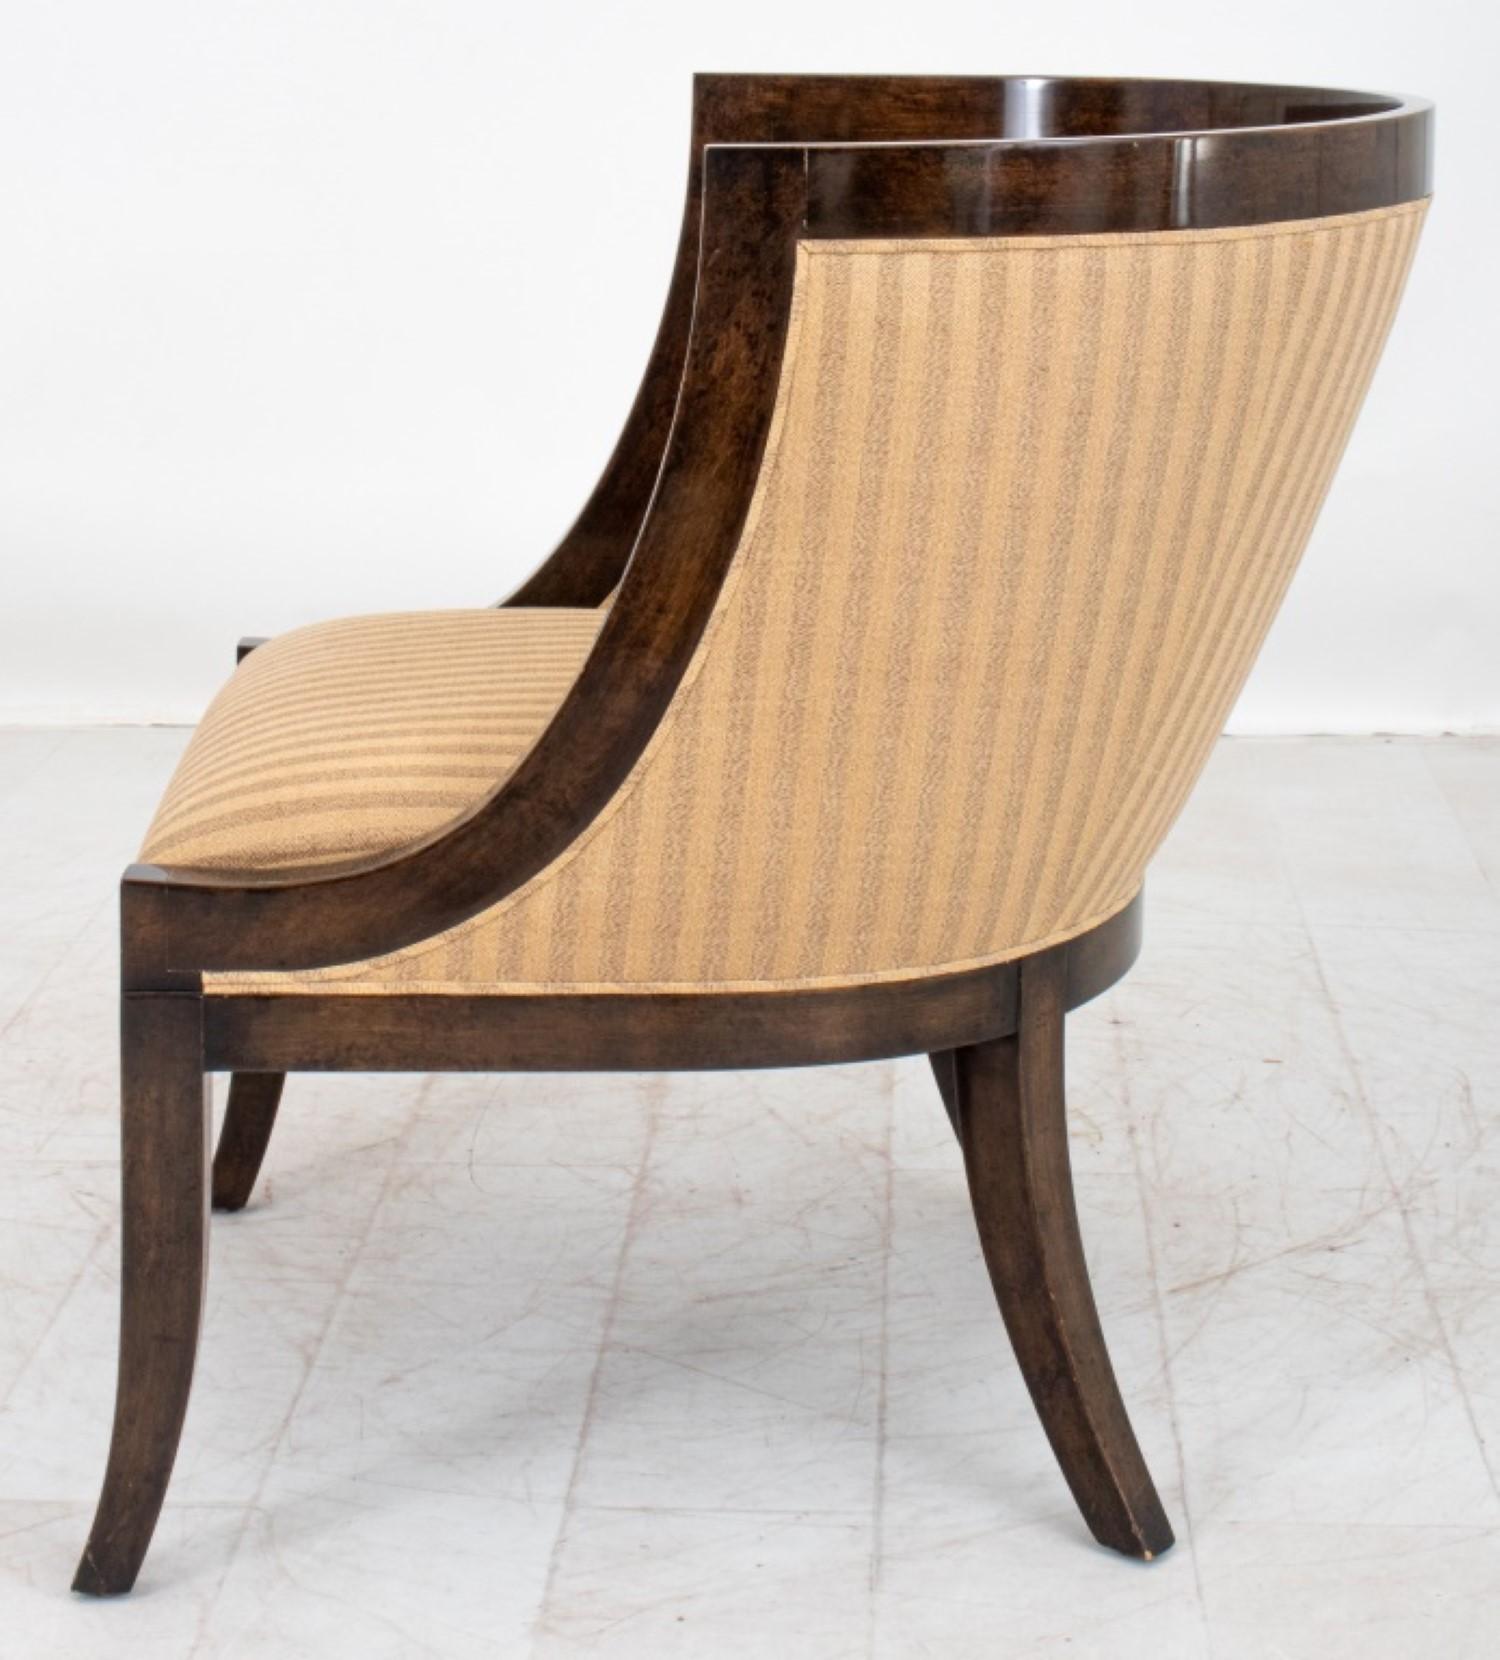 The Empire Style Brass Inlaid Mahogany Bergere, dating from the 20th century, features approximate. It embodies the Empire style, characterized by neoclassical influences and a distinctive tub chair design.

Dealer: S138XX